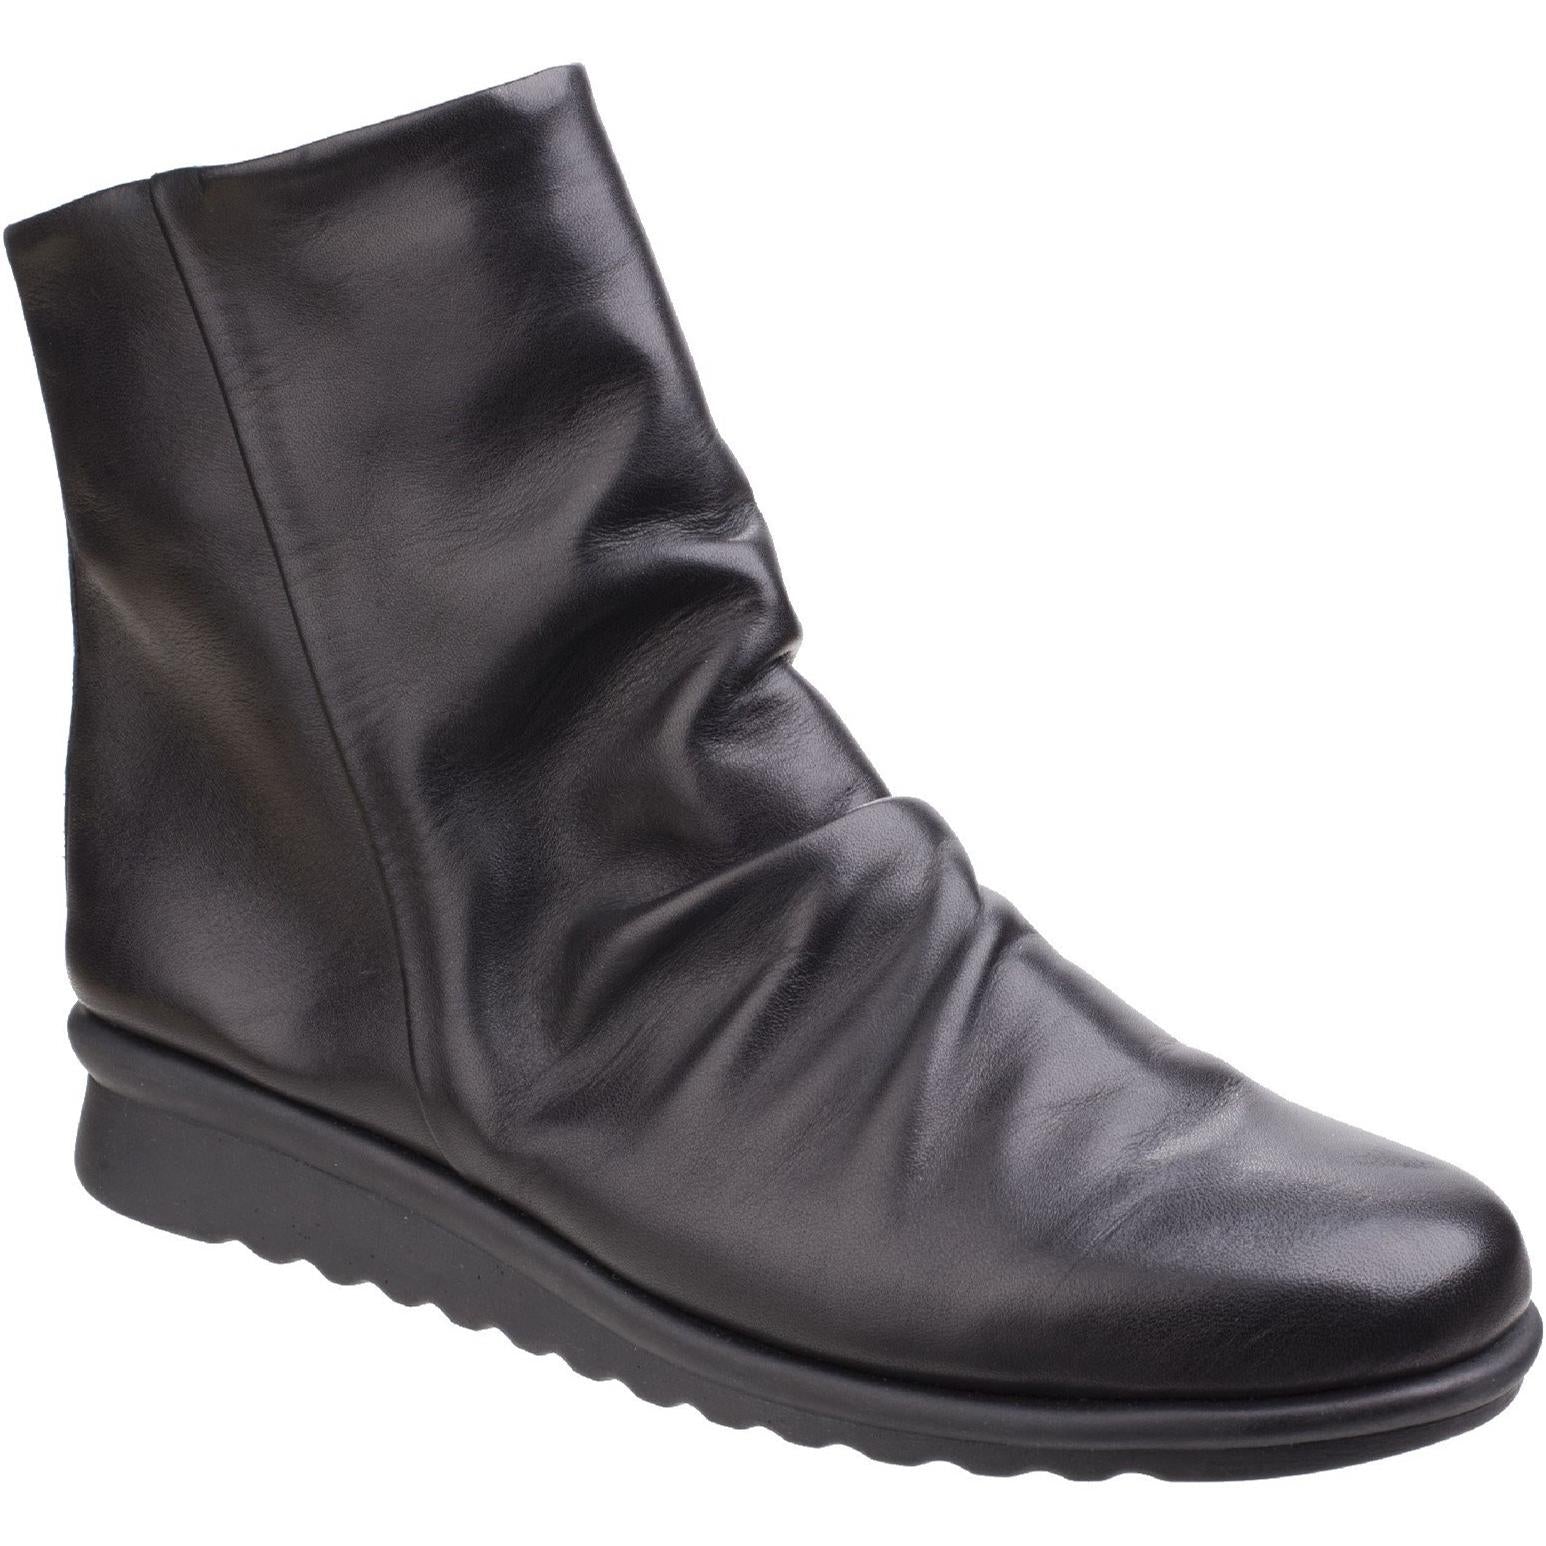 The Flexx Pan Fried Ruched Boot